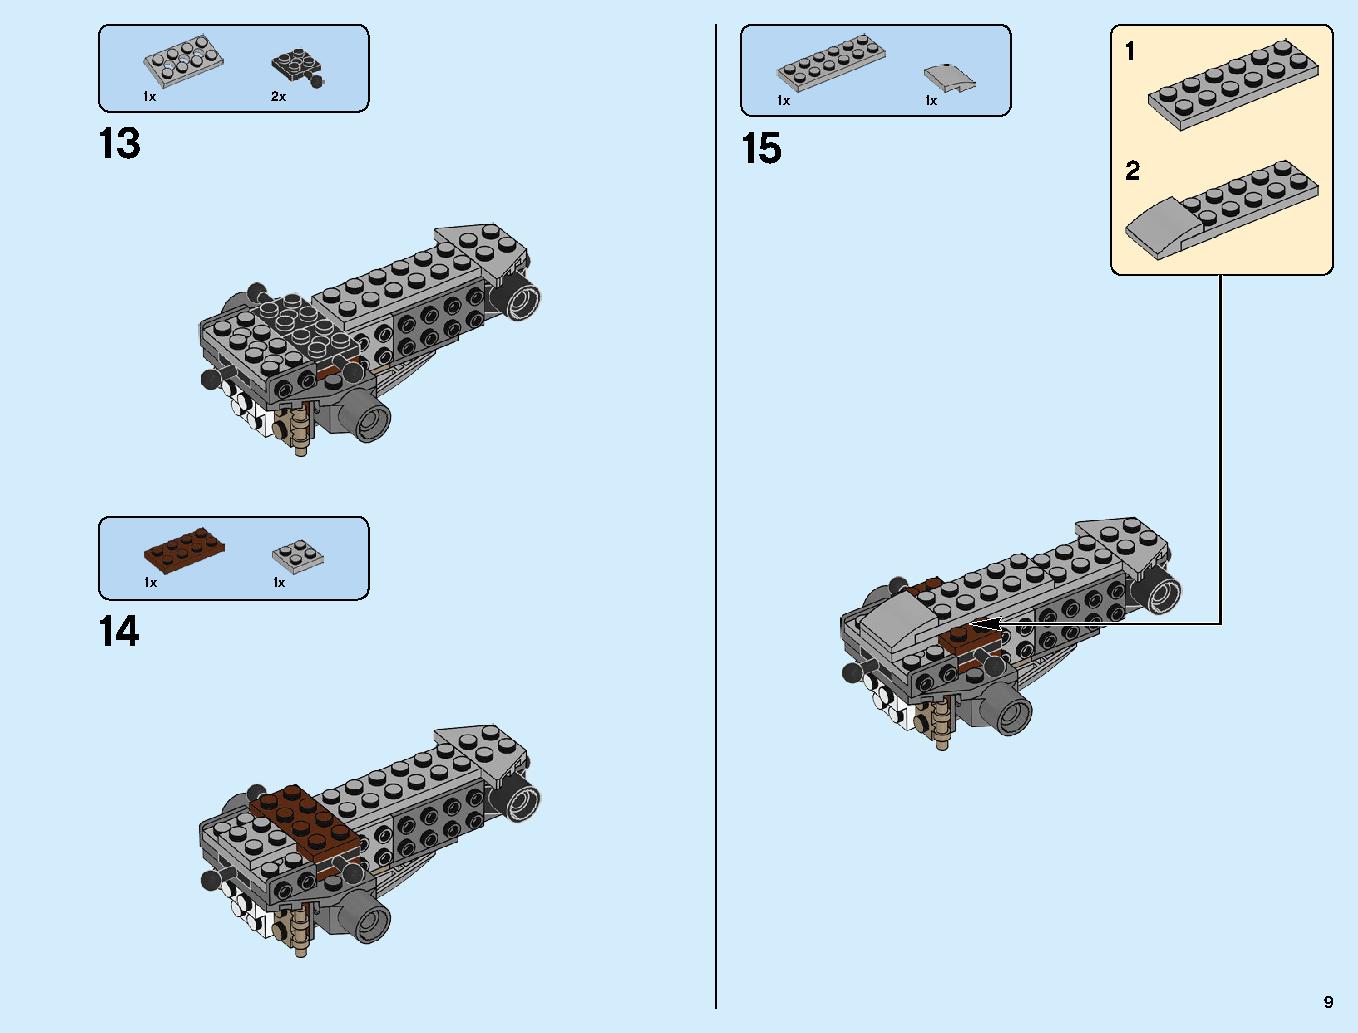 Dragon Pit 70655 LEGO information LEGO instructions 9 page